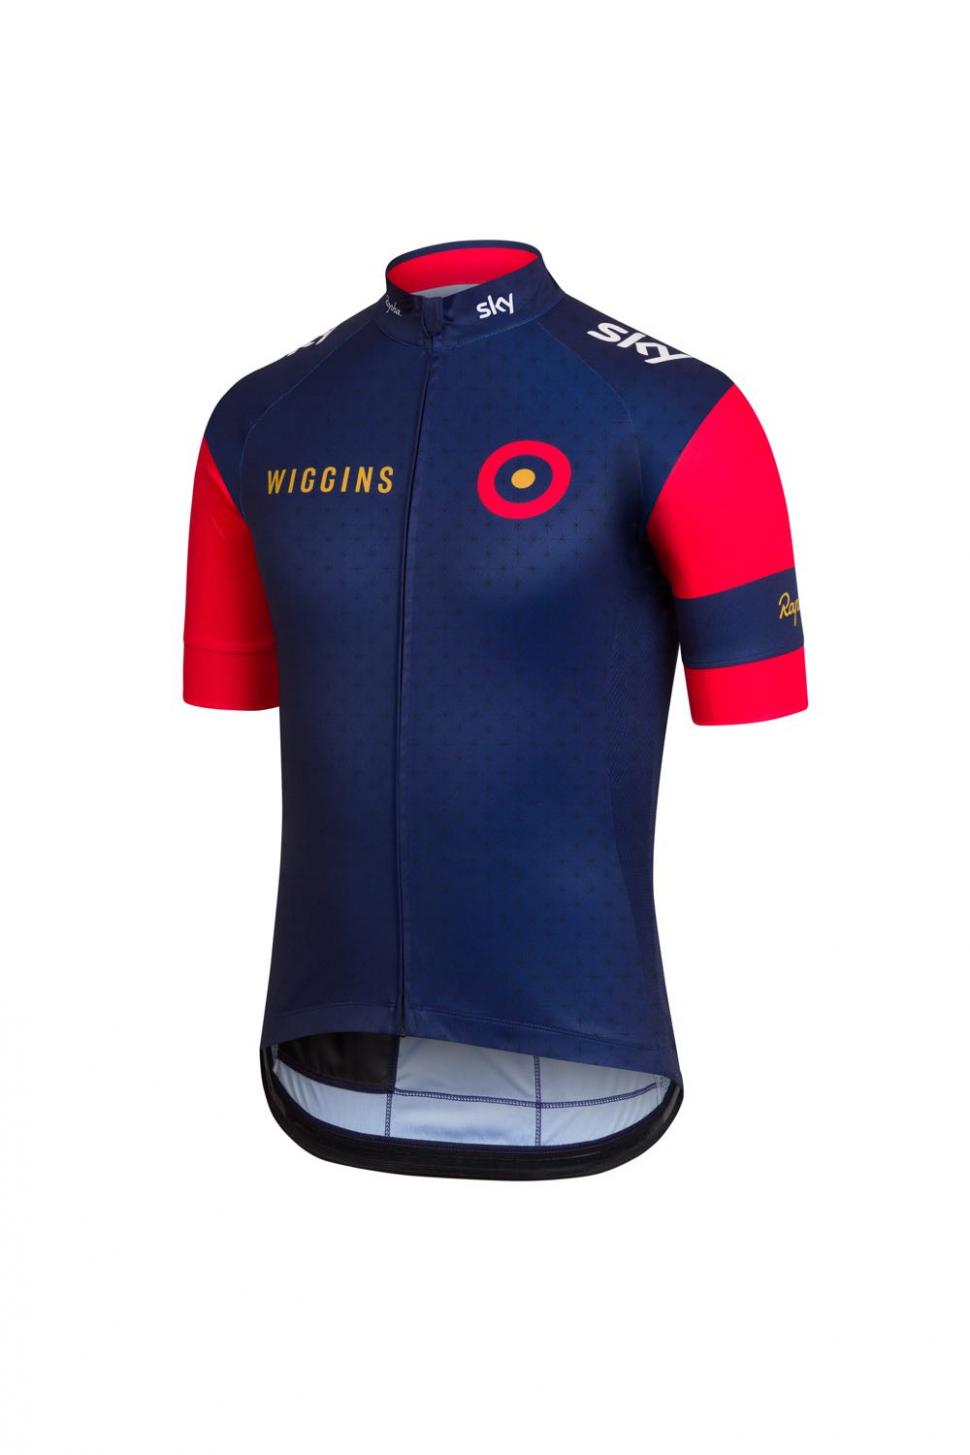 Rapha replica Team Wiggins kit launched ahead of Hour record 